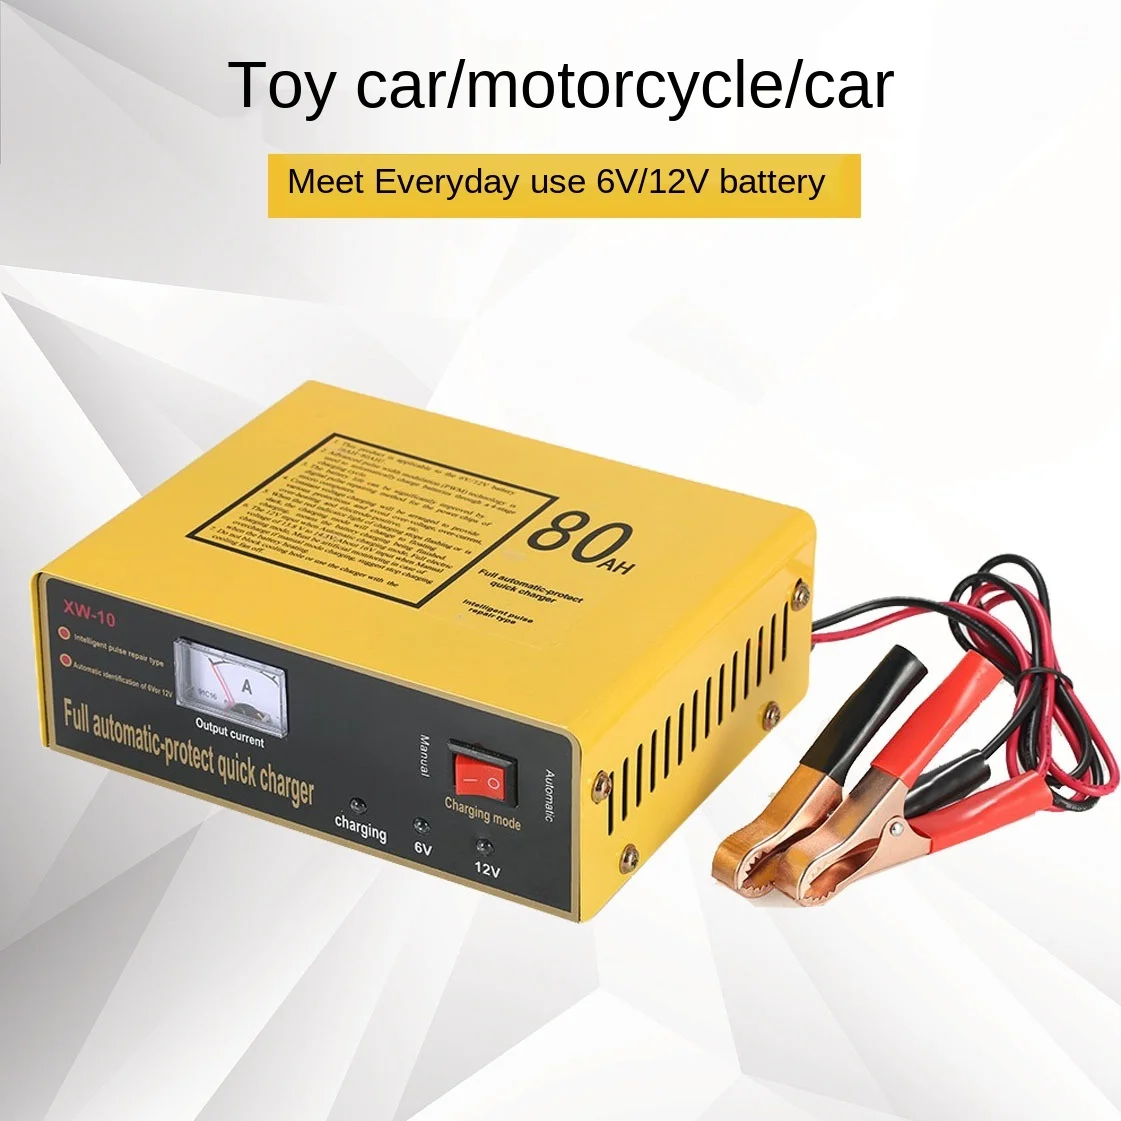 6V/12V Smart Automatic 12v Battery box Charger For Baby Stroller Toy Car batery Battery Battery Charger chargers